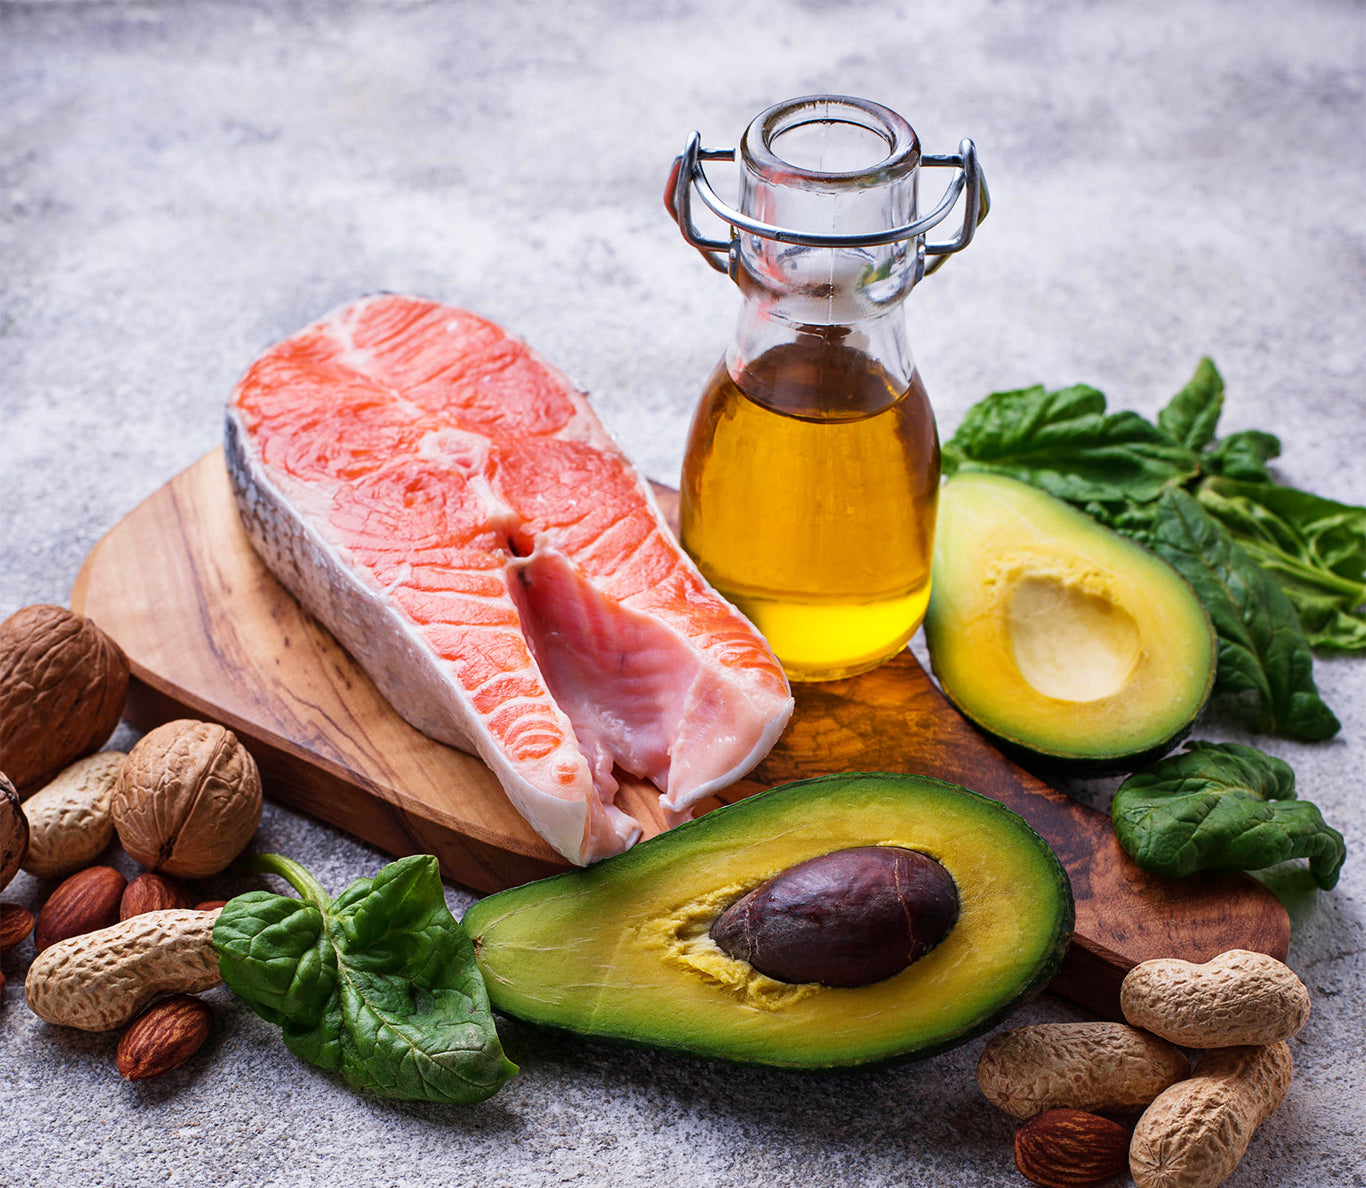 an jar of olive oil surrounded by foods with healthy fats like salmon and avocados